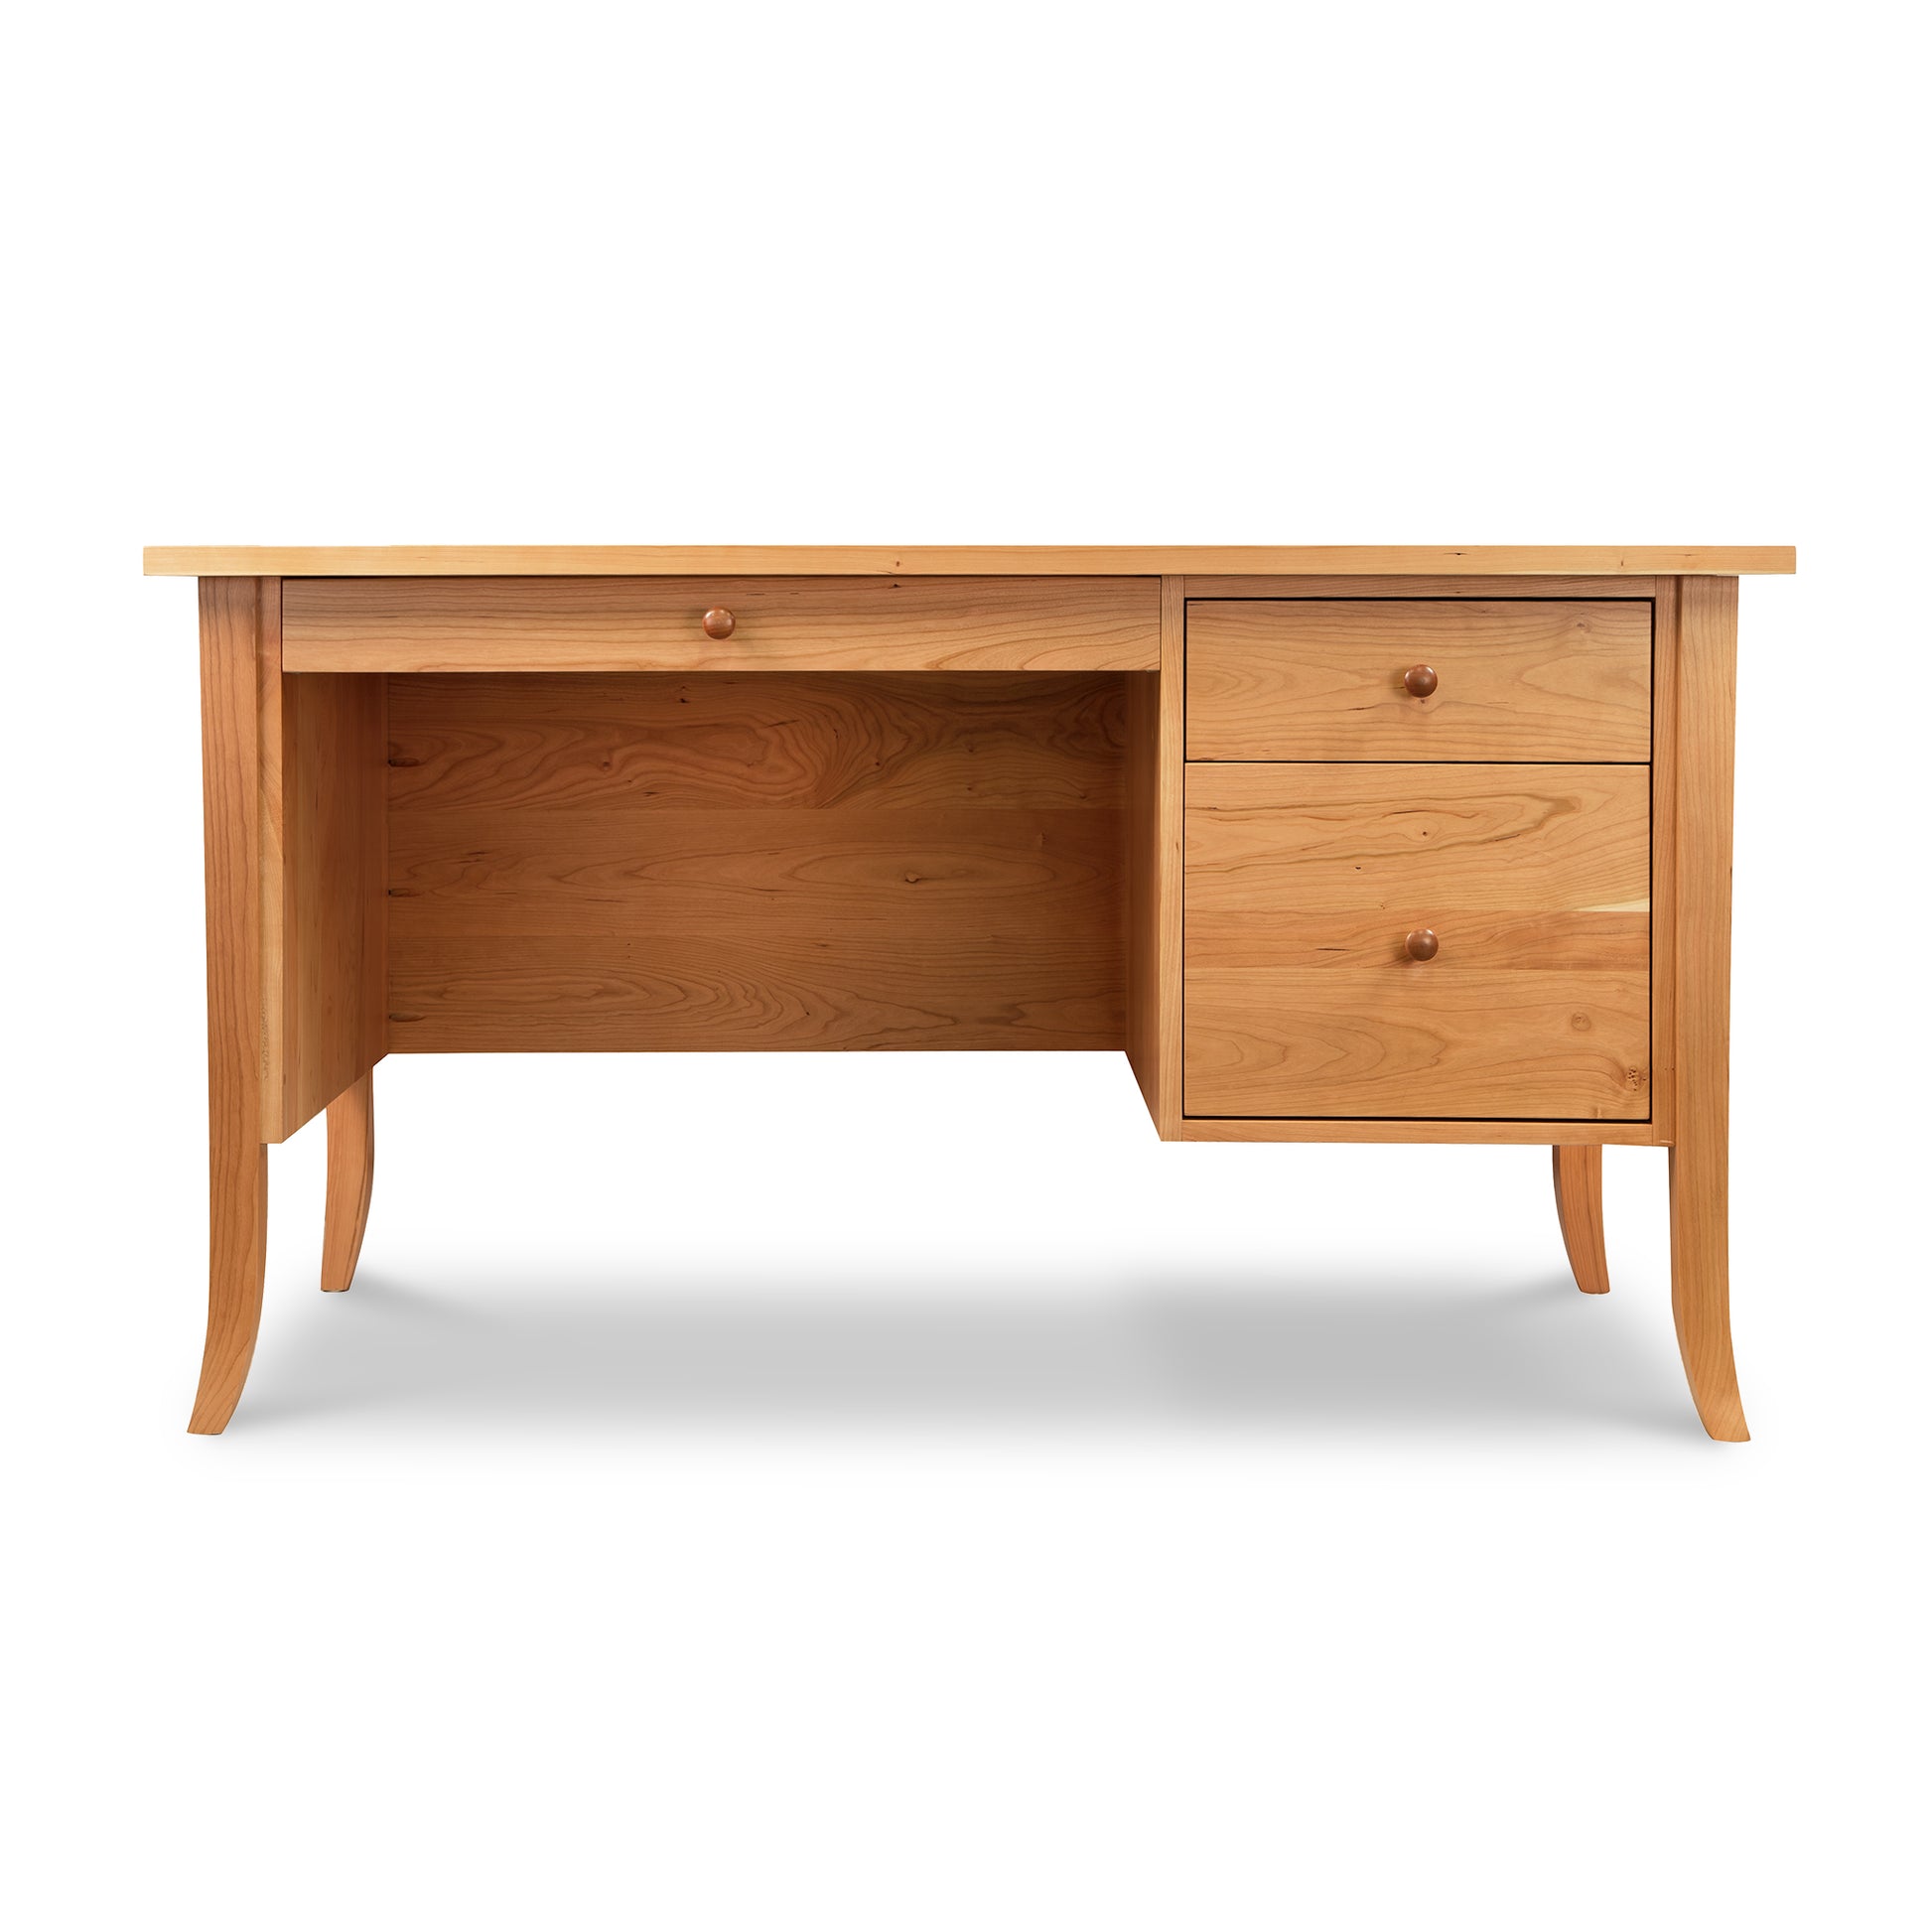 A Small Wood Flare Leg Executive Desk with solid wood construction and two drawers, made by Lyndon Furniture.